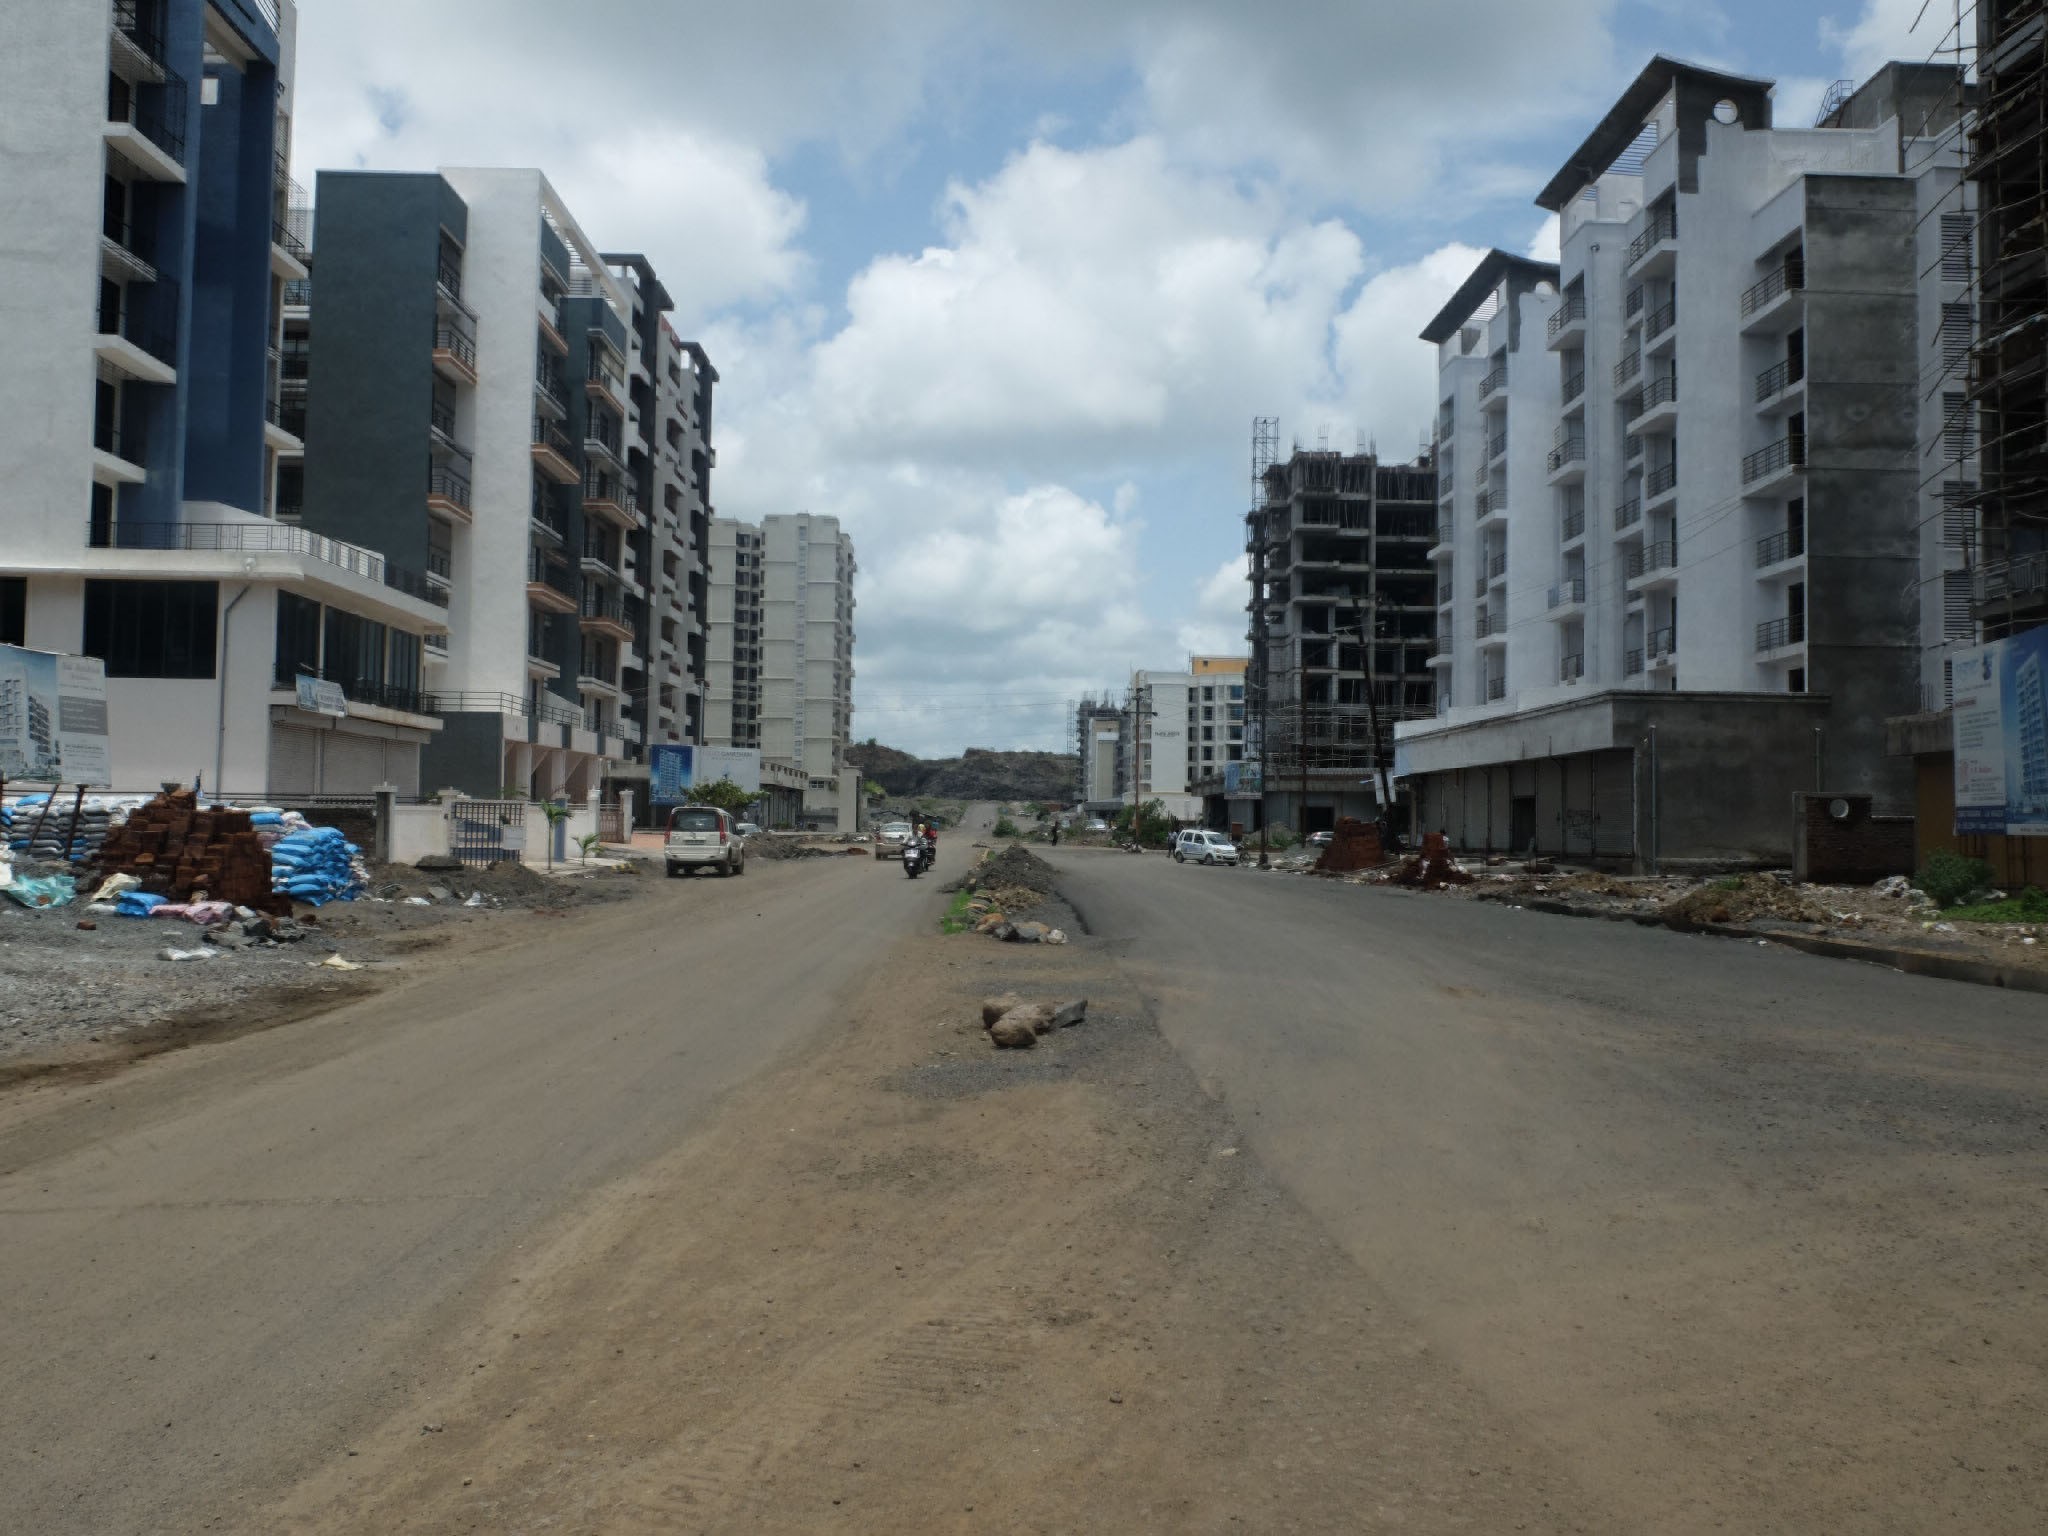 Image 1: A street view of Ulwe showing the emptiness of the surrounding buildings